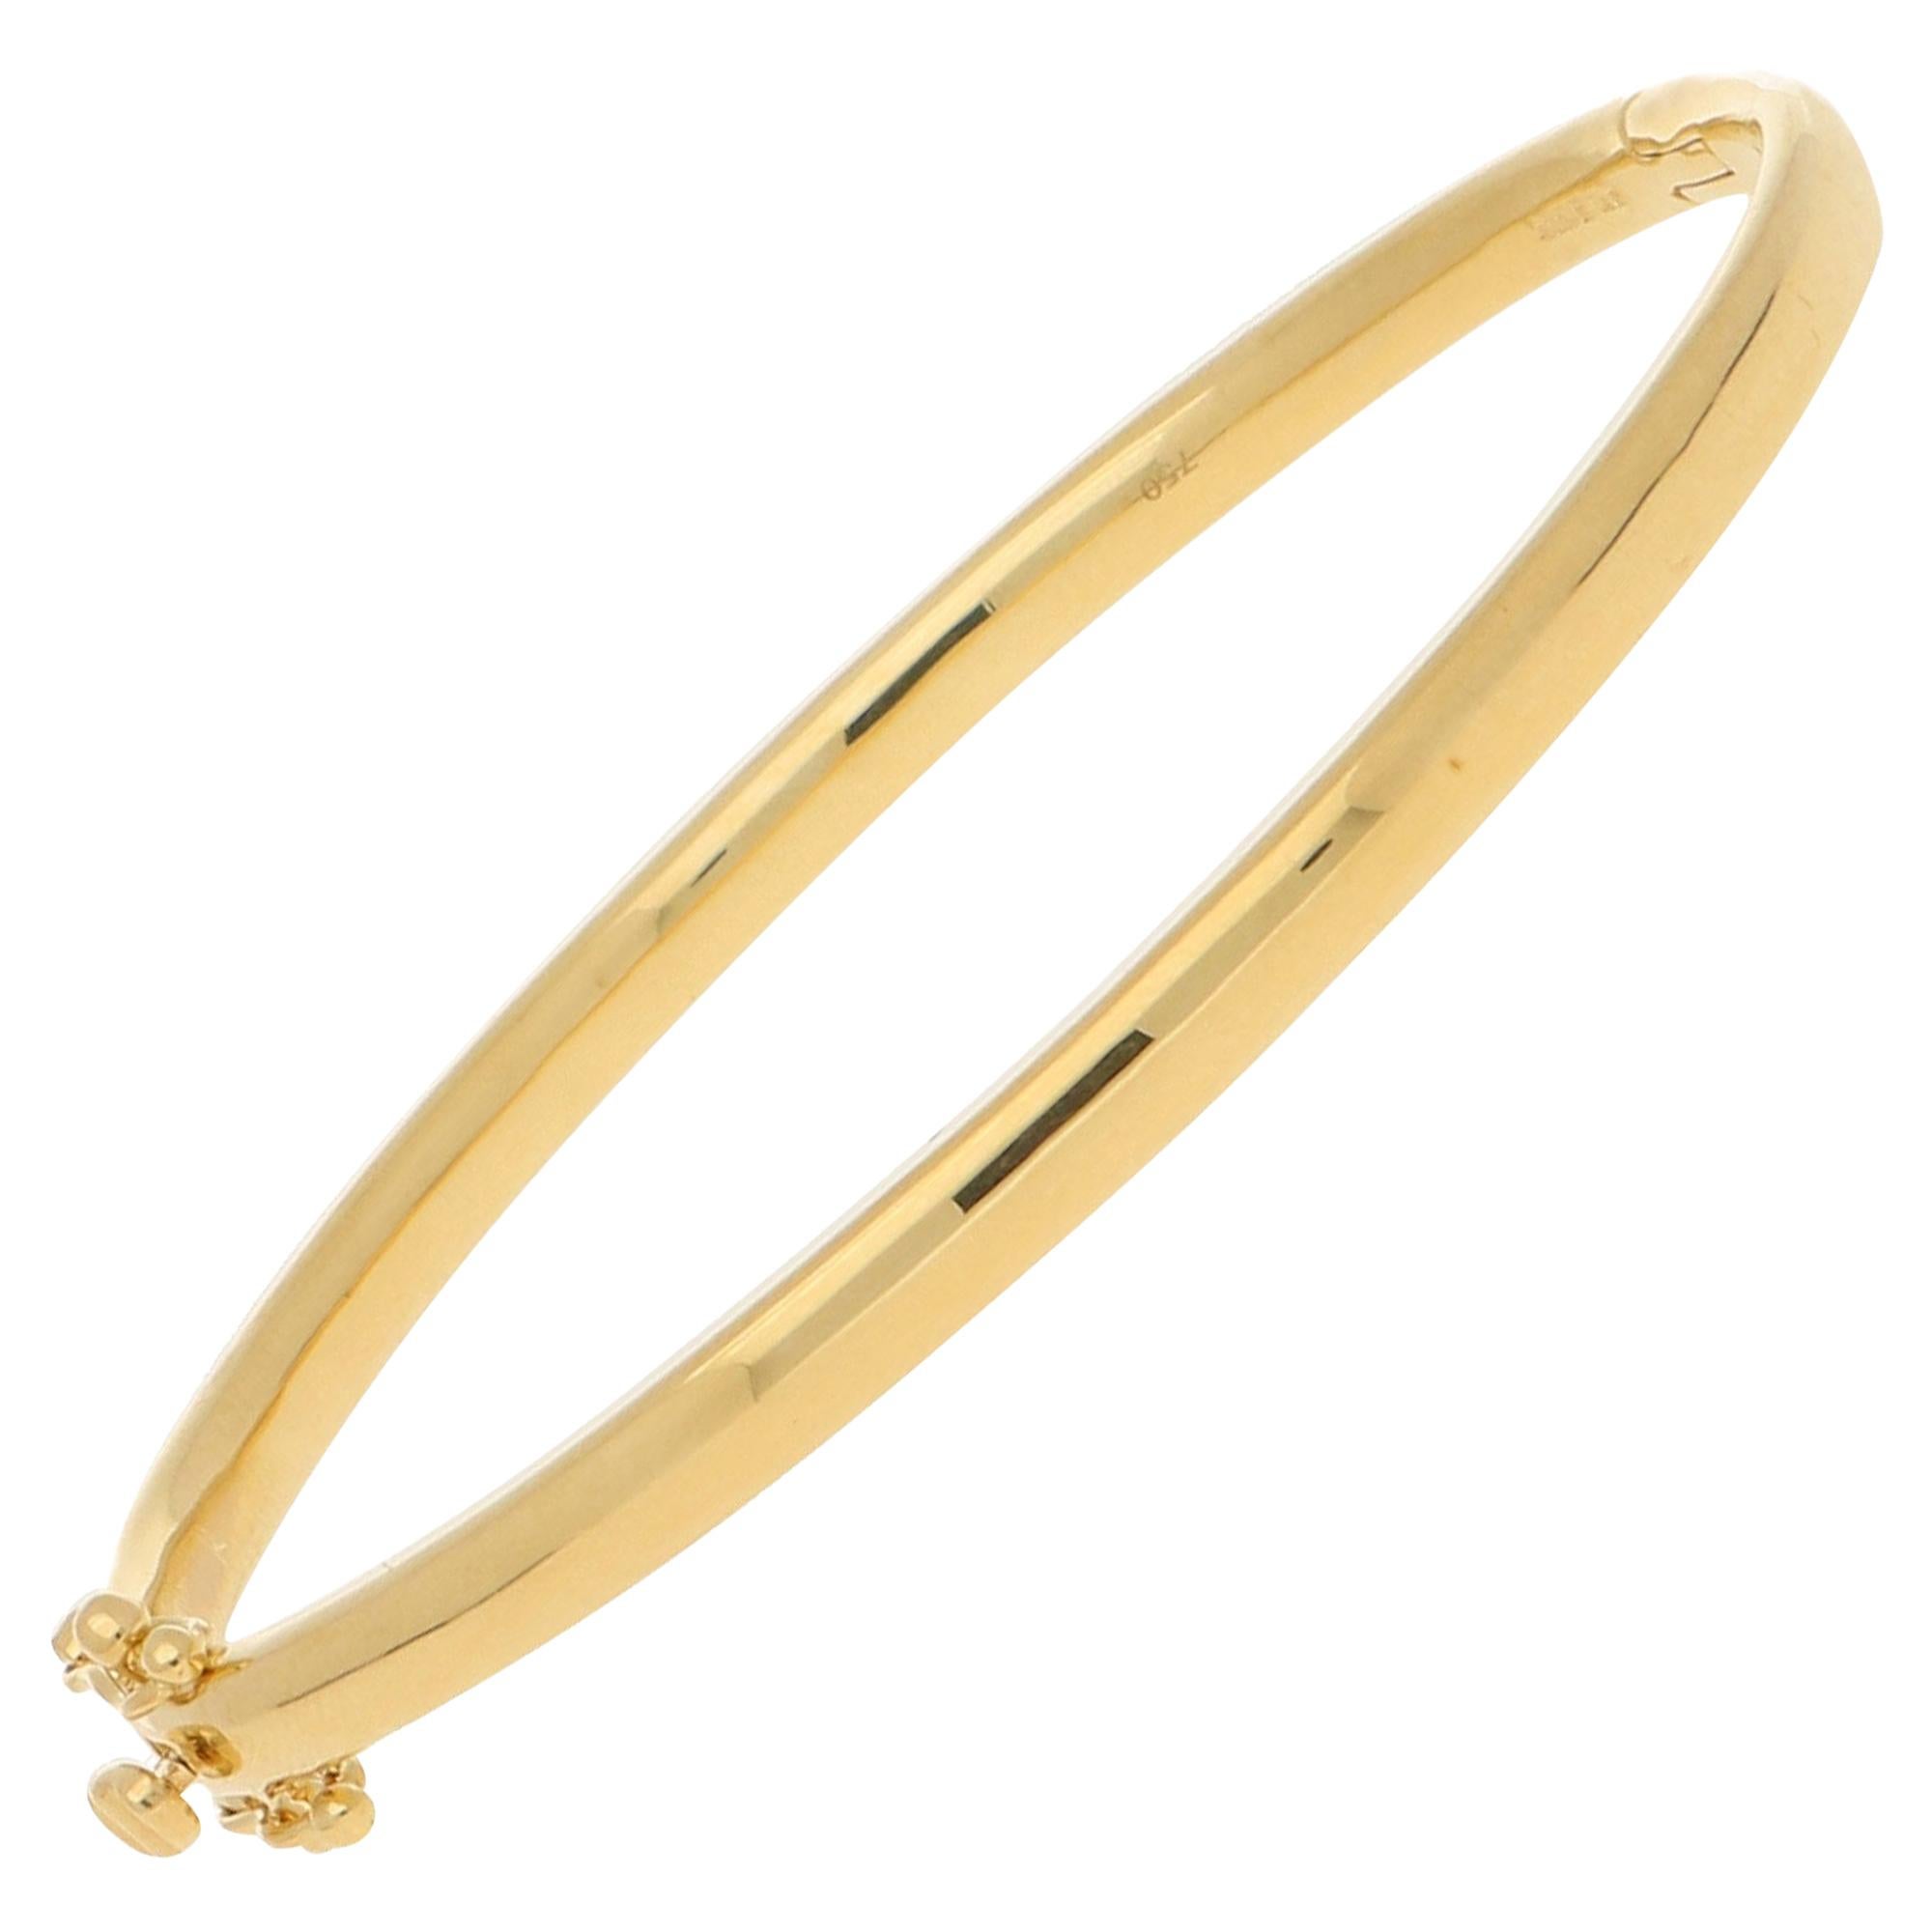 Solid 18 Karat Yellow Gold Hinged Bangle with Safety Catch